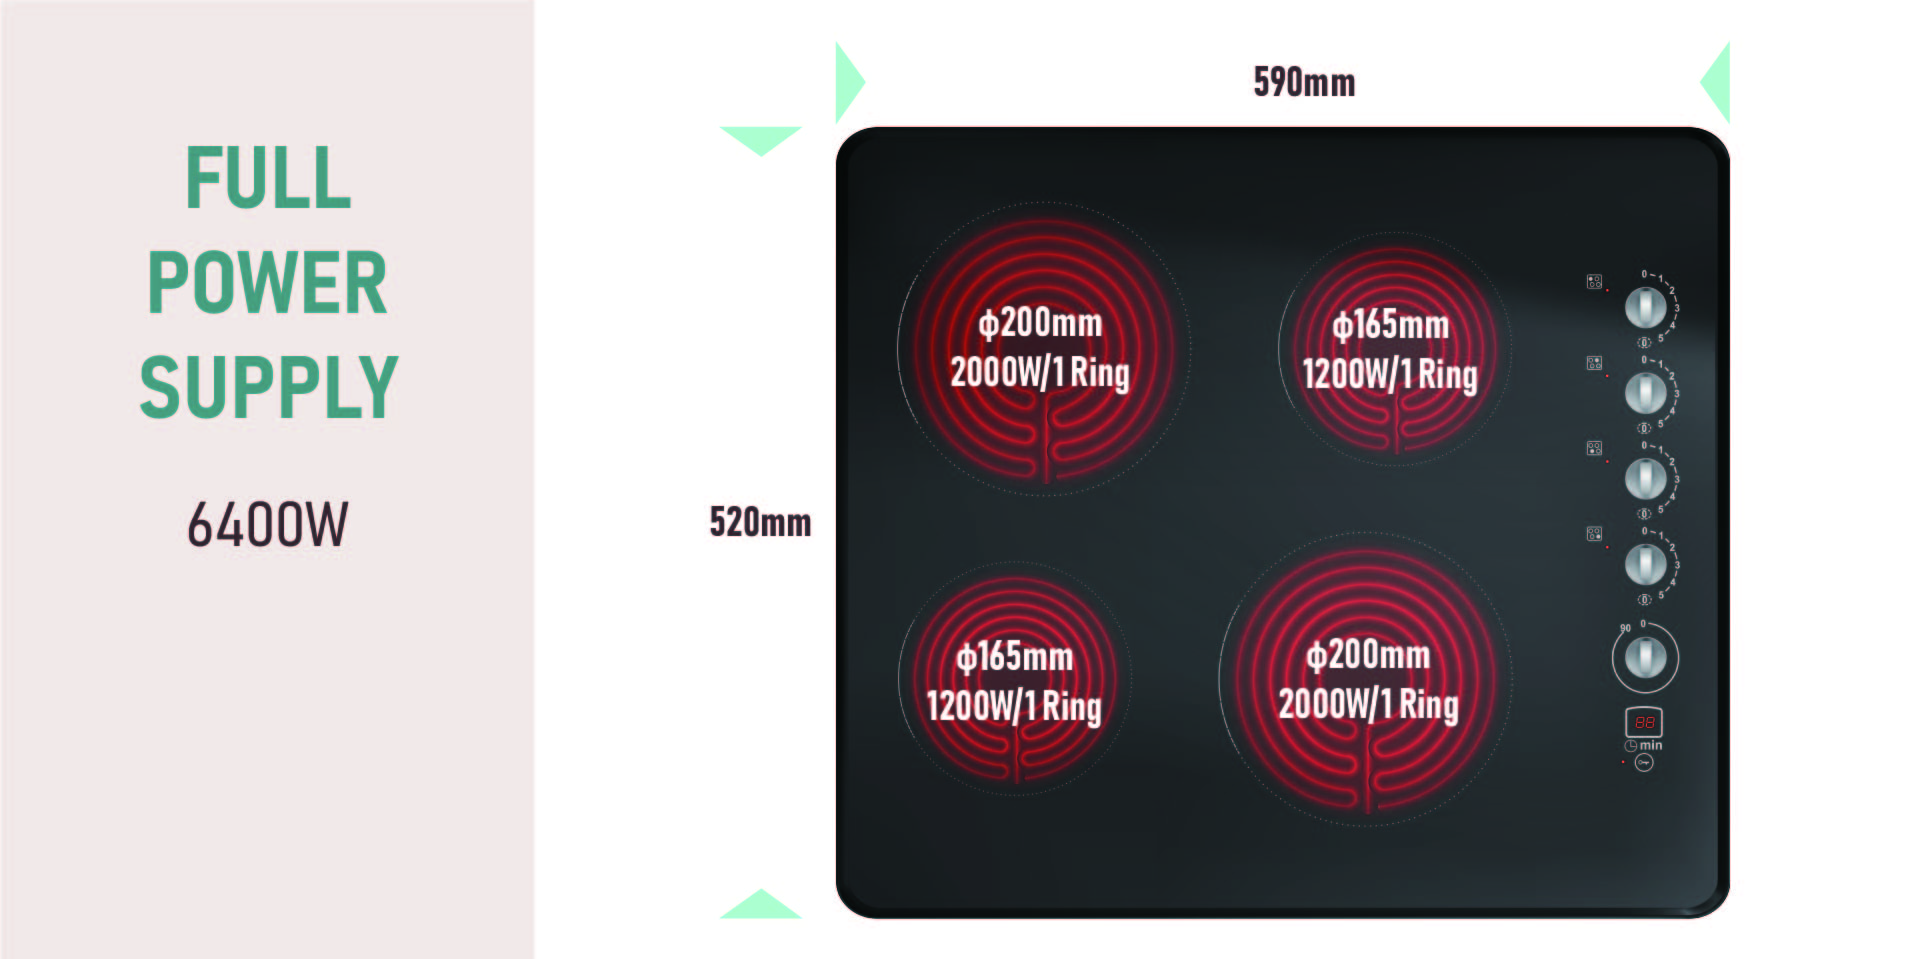 Customized 600mm Built-in 4 Zone Ceramic Cooktop with Knob Control manufacturers From China | H-one